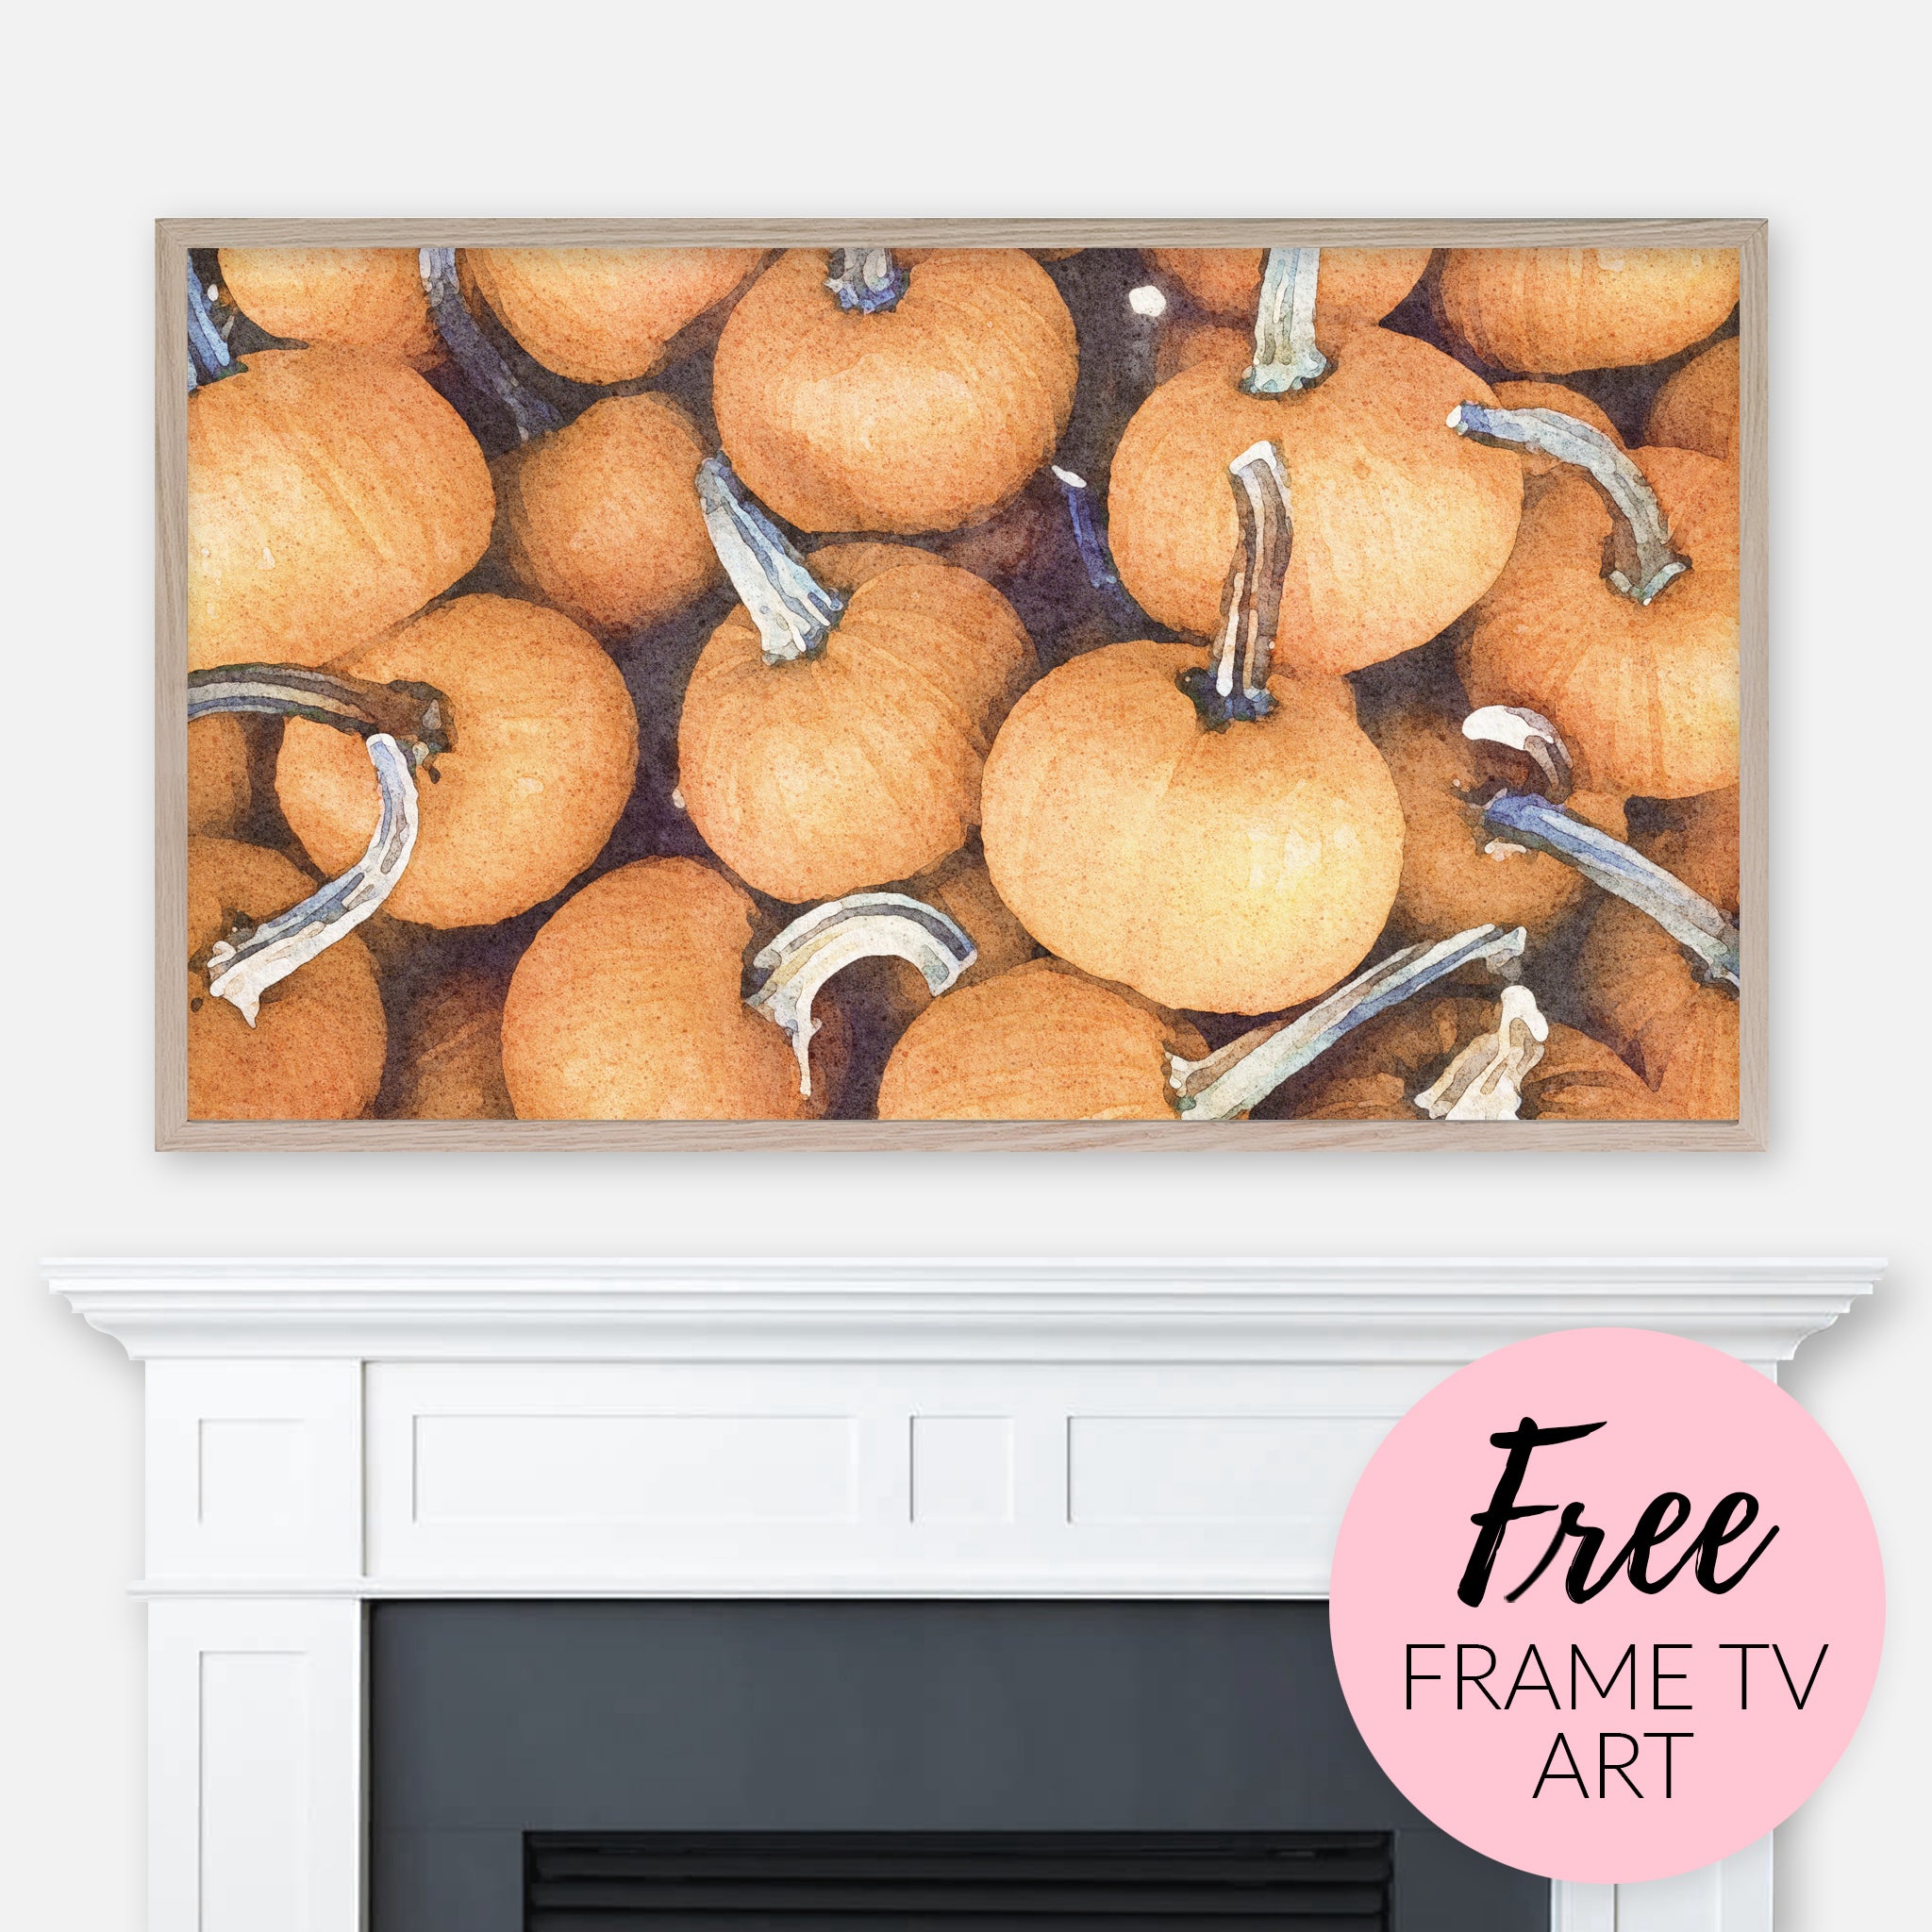 Free Frame TV Art Download - Digital watercolor painting of a pile of pumpkins displayed above fireplace